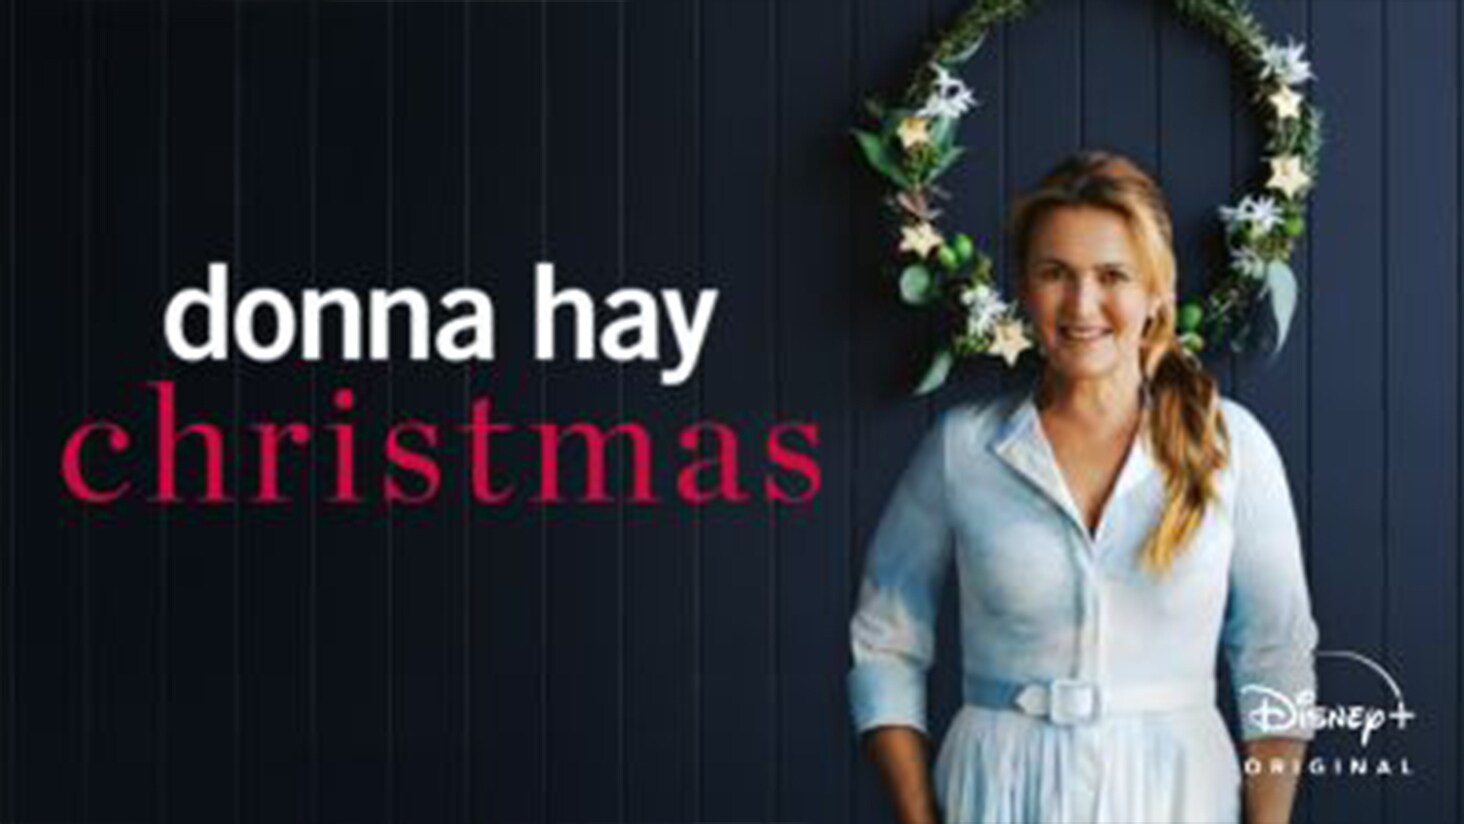 An image of Donna Hay standing in front of a christmas wreath, against a dark blue wall.